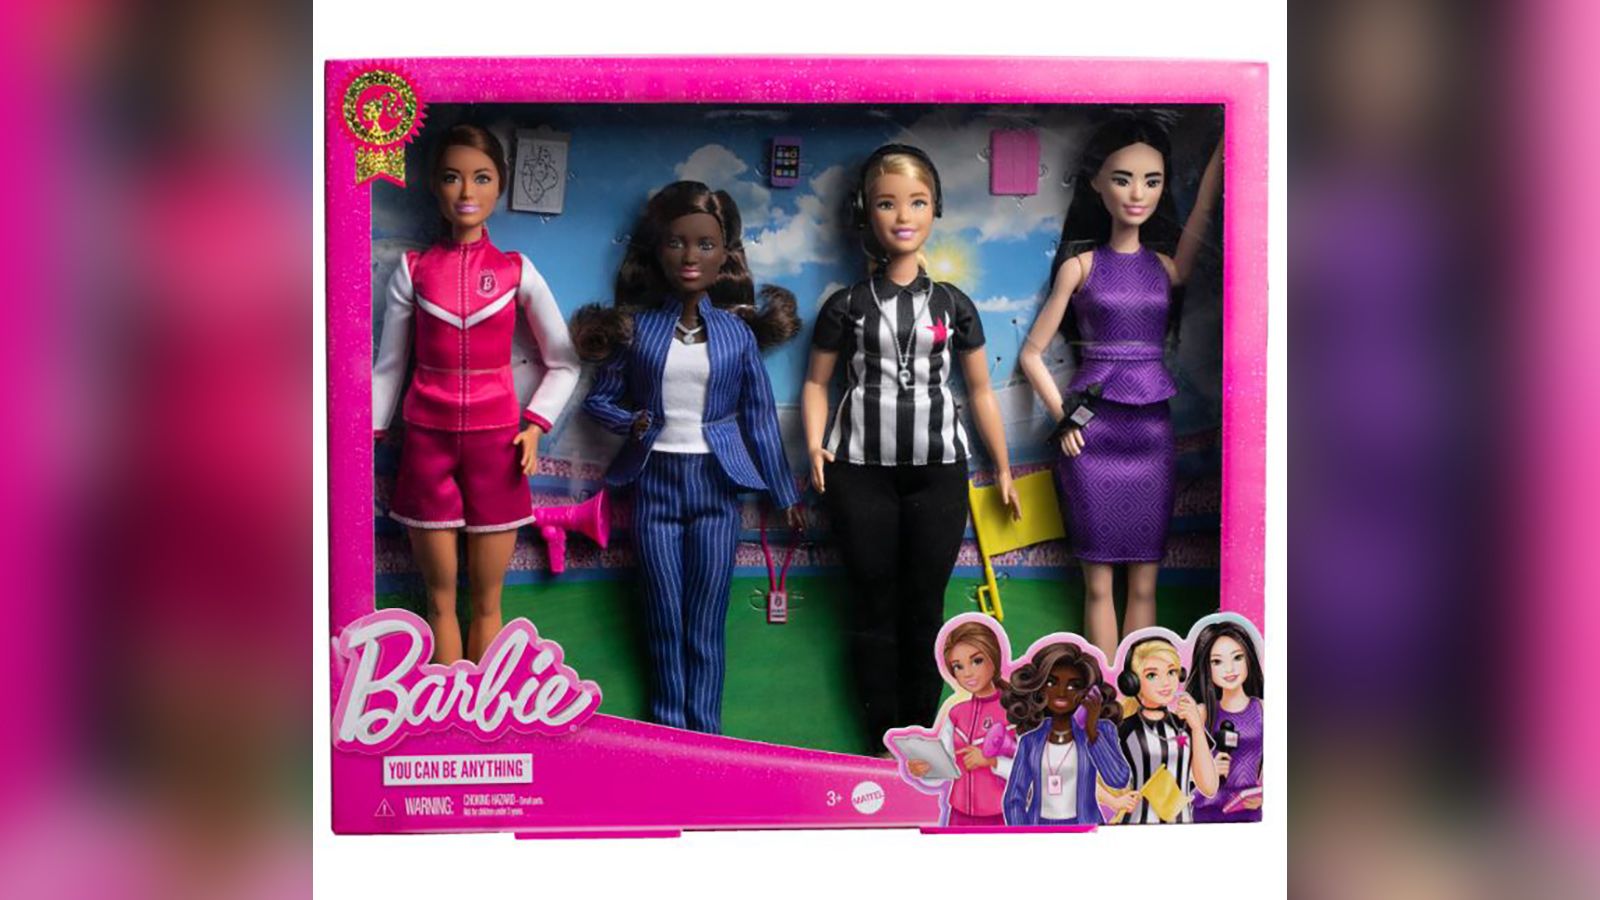 Our Barbies, ourselves – The Denver Post